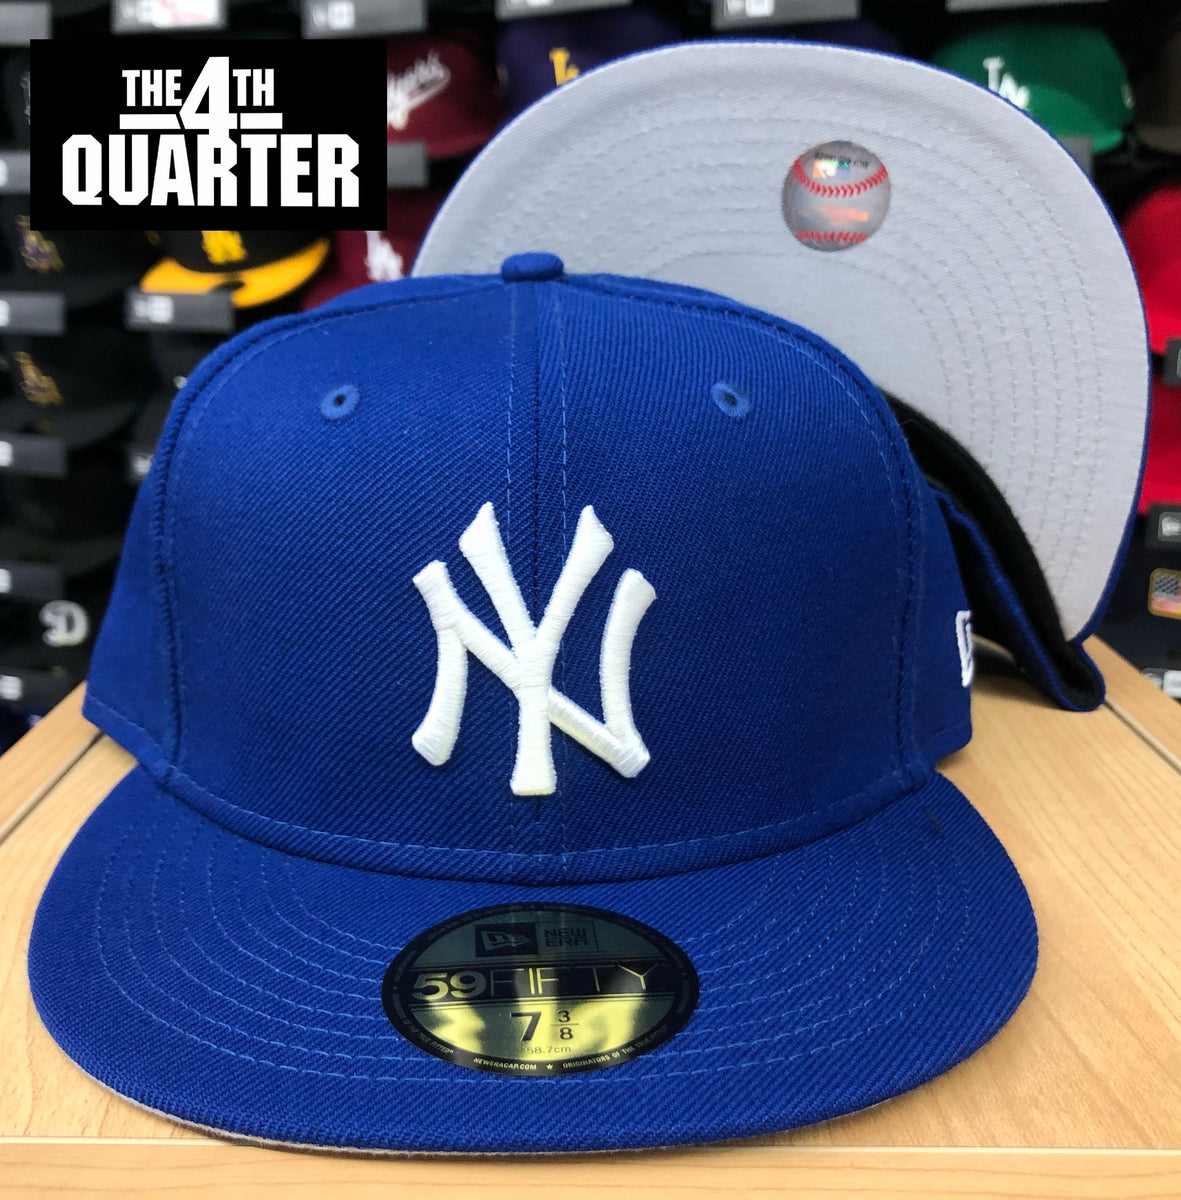 New | York Era Hat 4TH UV Yankees THE QUARTER New GREY Royal Cap Fitted 59Fifty Blue